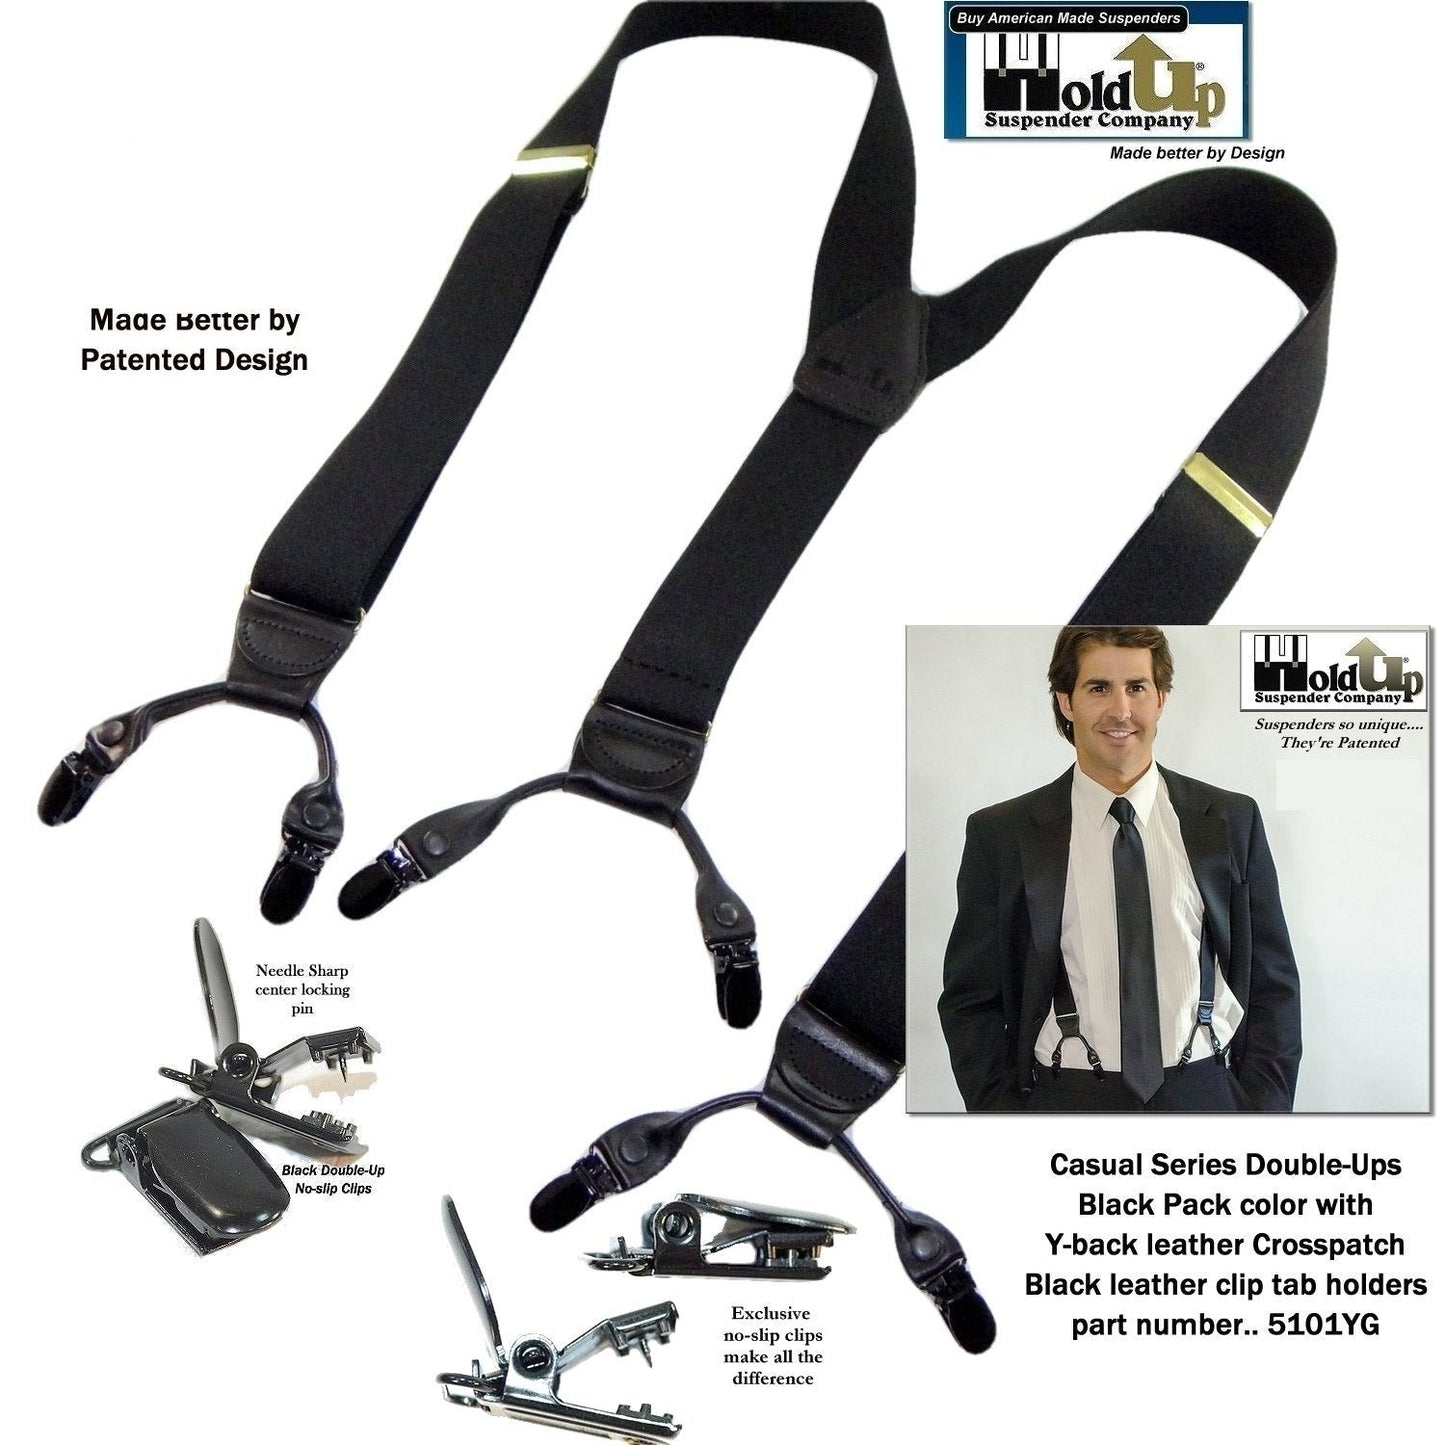 HoldUp Suspender Company's Black Pack Double-Up Style Dressy All black Y-back Suspenders With Patented No-slip clips